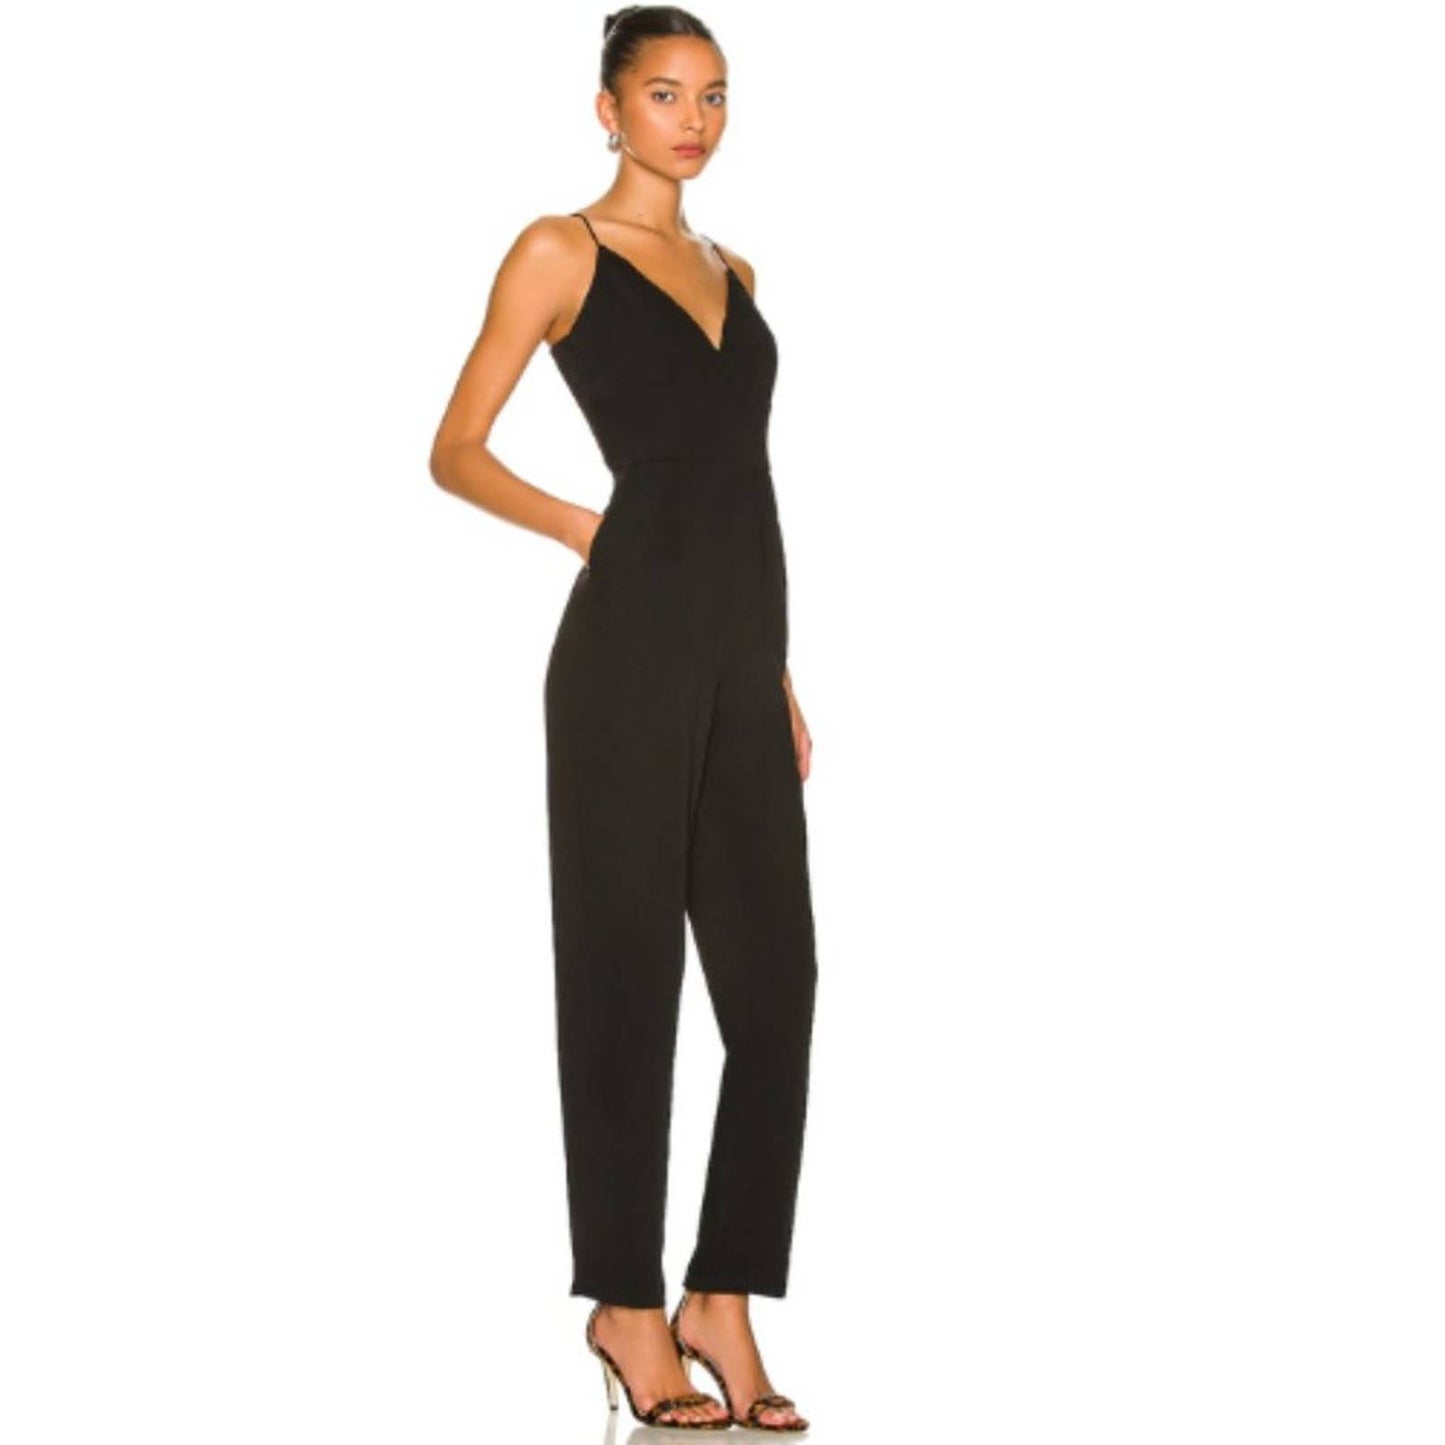 Revolve x More to Come Heidi Cami Jumpsuit in Black NWOT Size Small